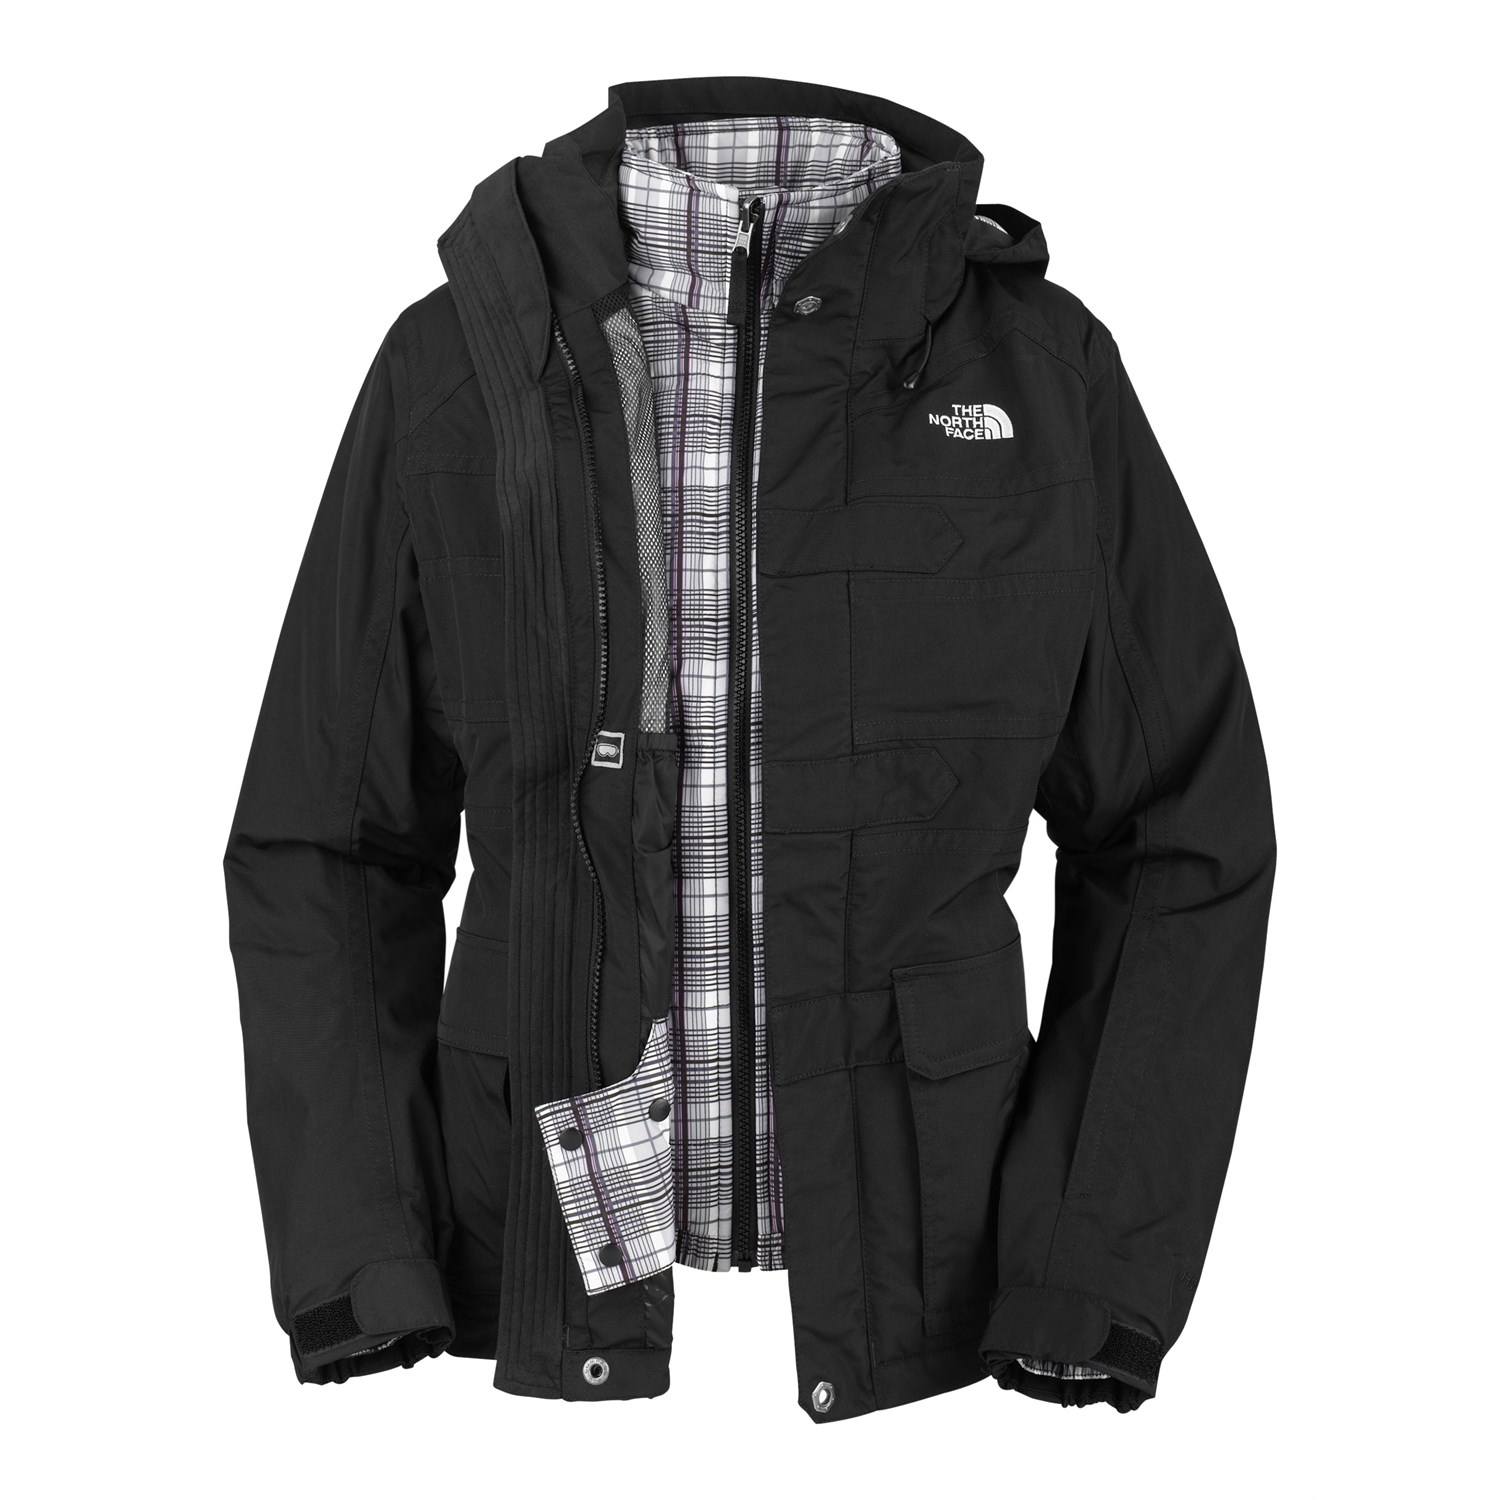 the north face 3 in 1 jacket women's